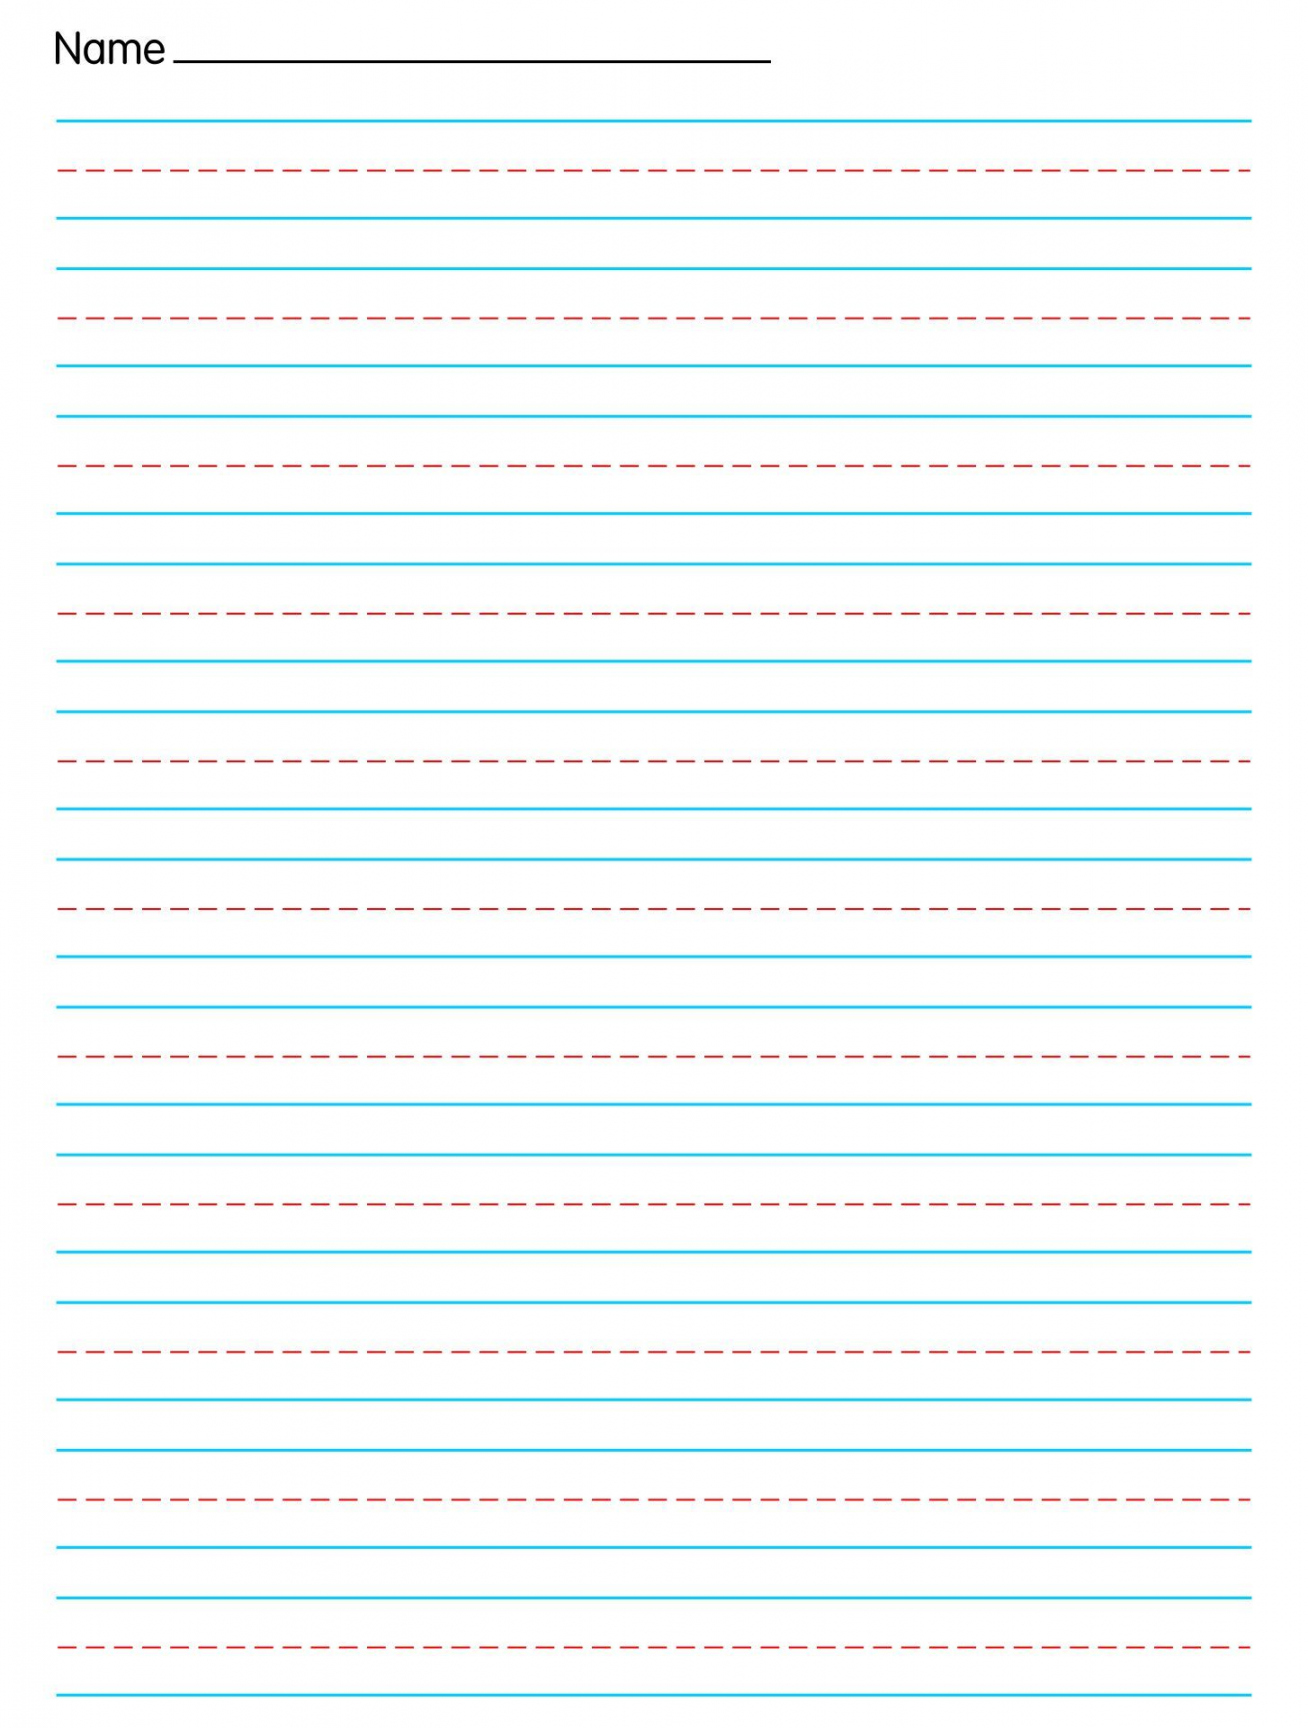 Primary Writing Paper Template  Notebook paper template, Writing  - FREE Printables - Primary Lined Paper Printable